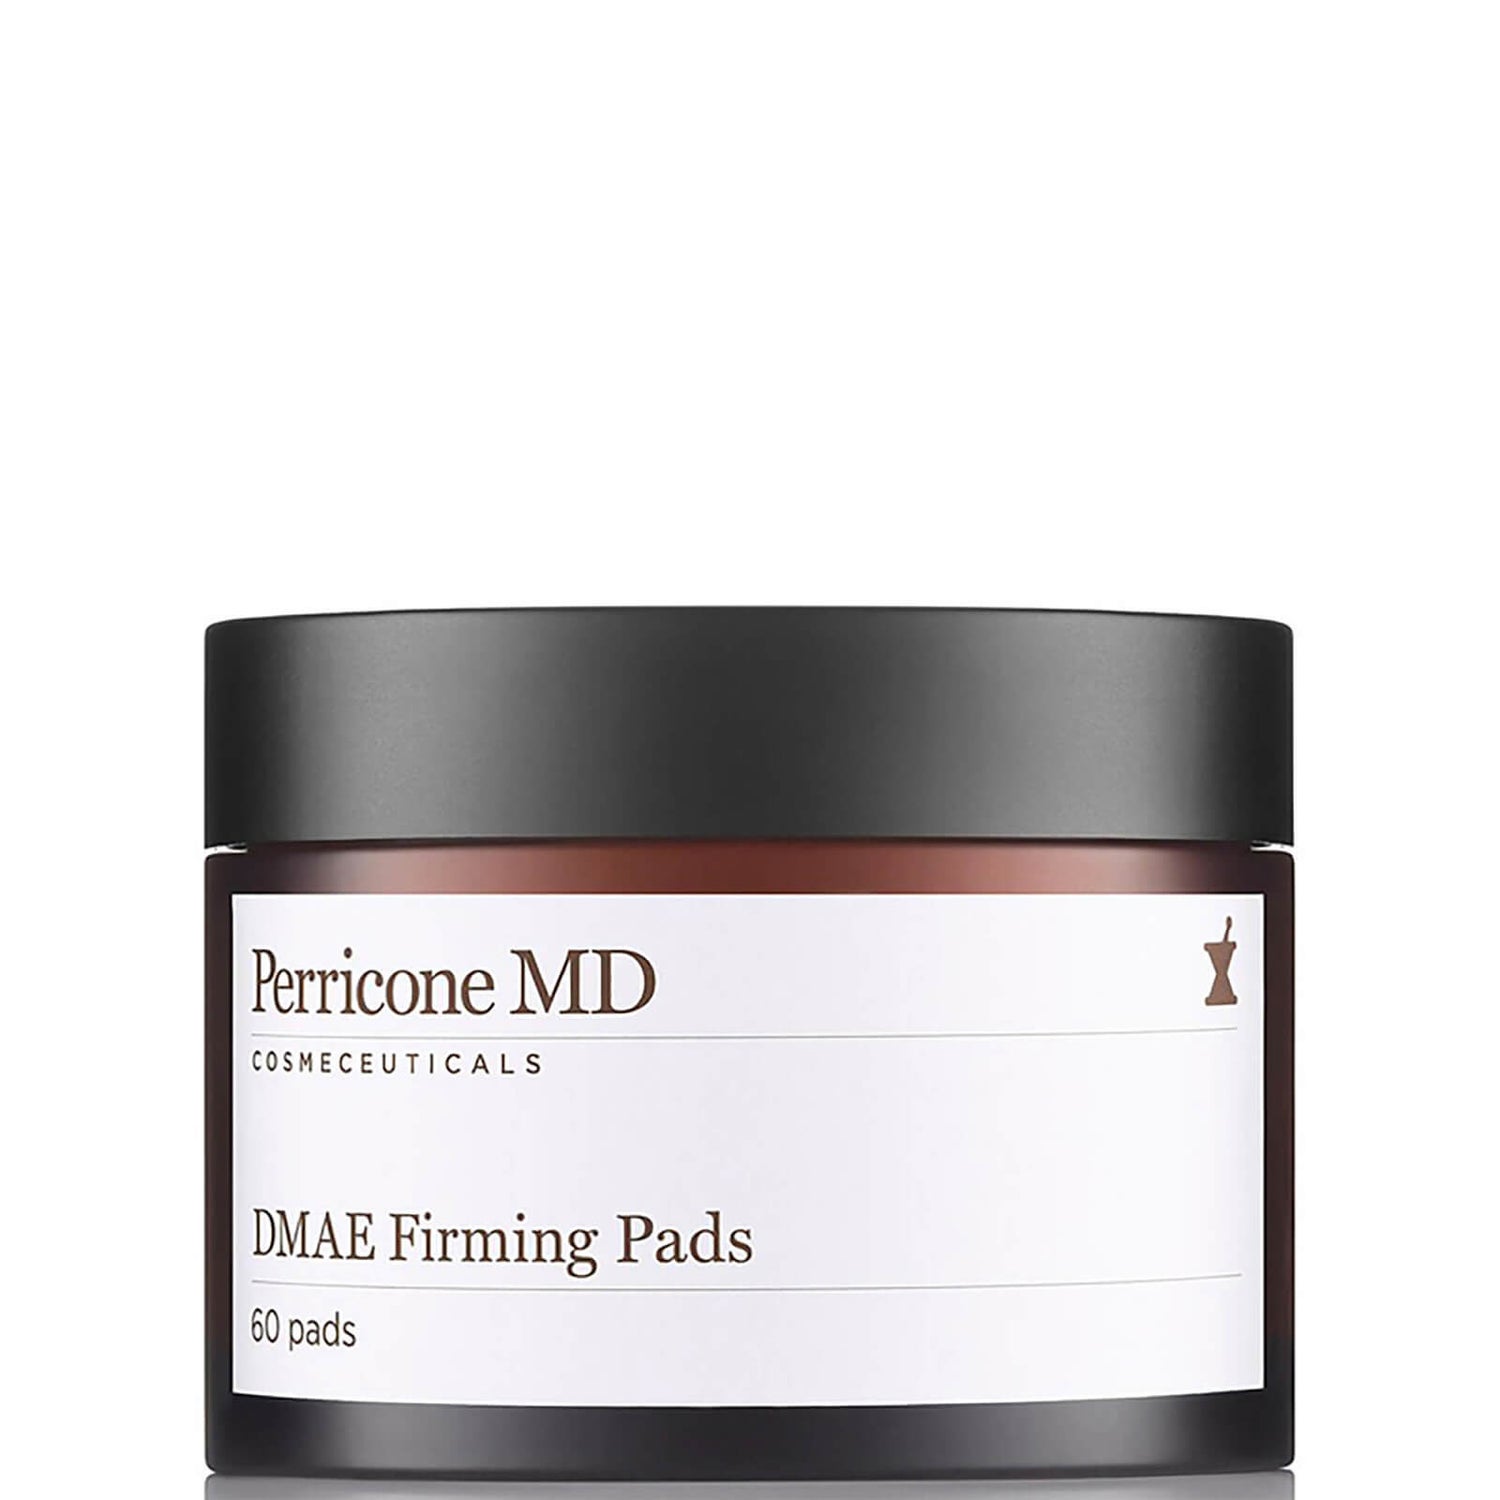 Perricone MD DMAE Firming Pads